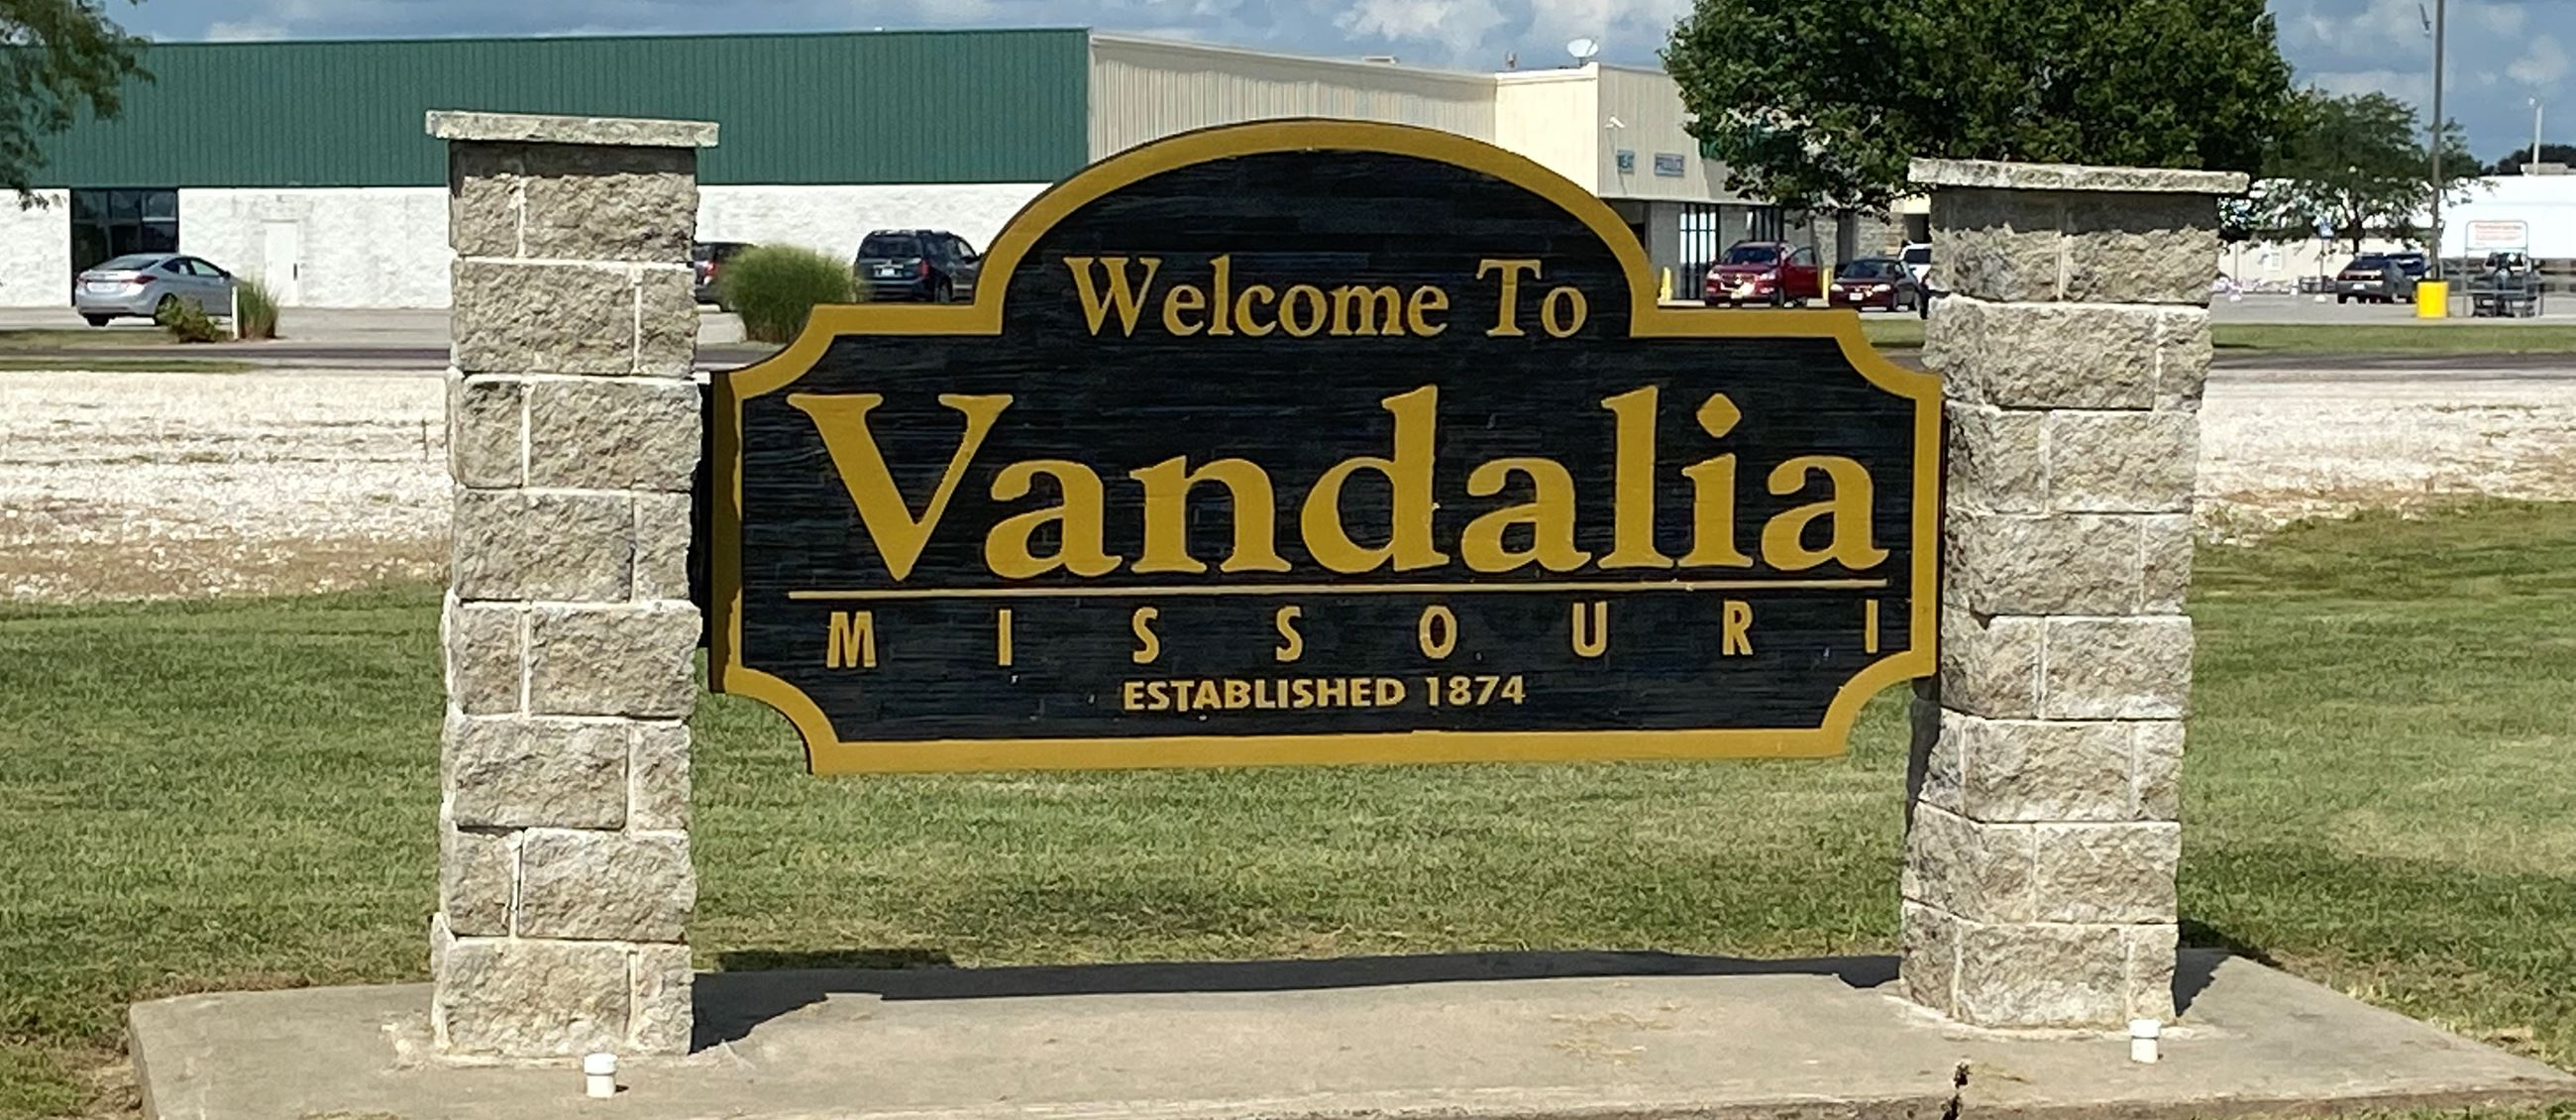 welcome to vandalia missouri established 1874. Welcome sing to city.